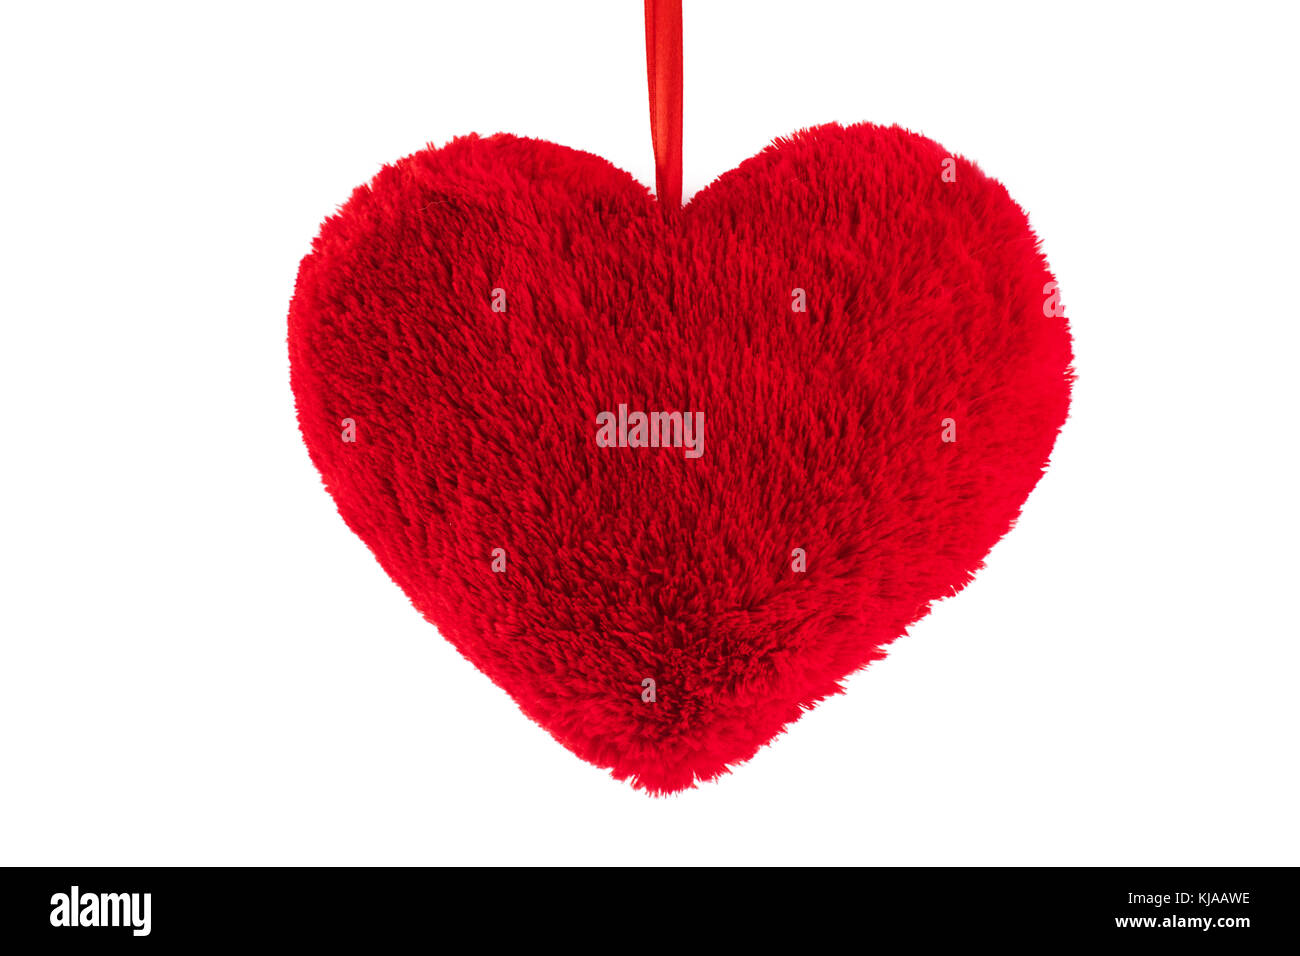 Plush red heart on white background. Stock Photo